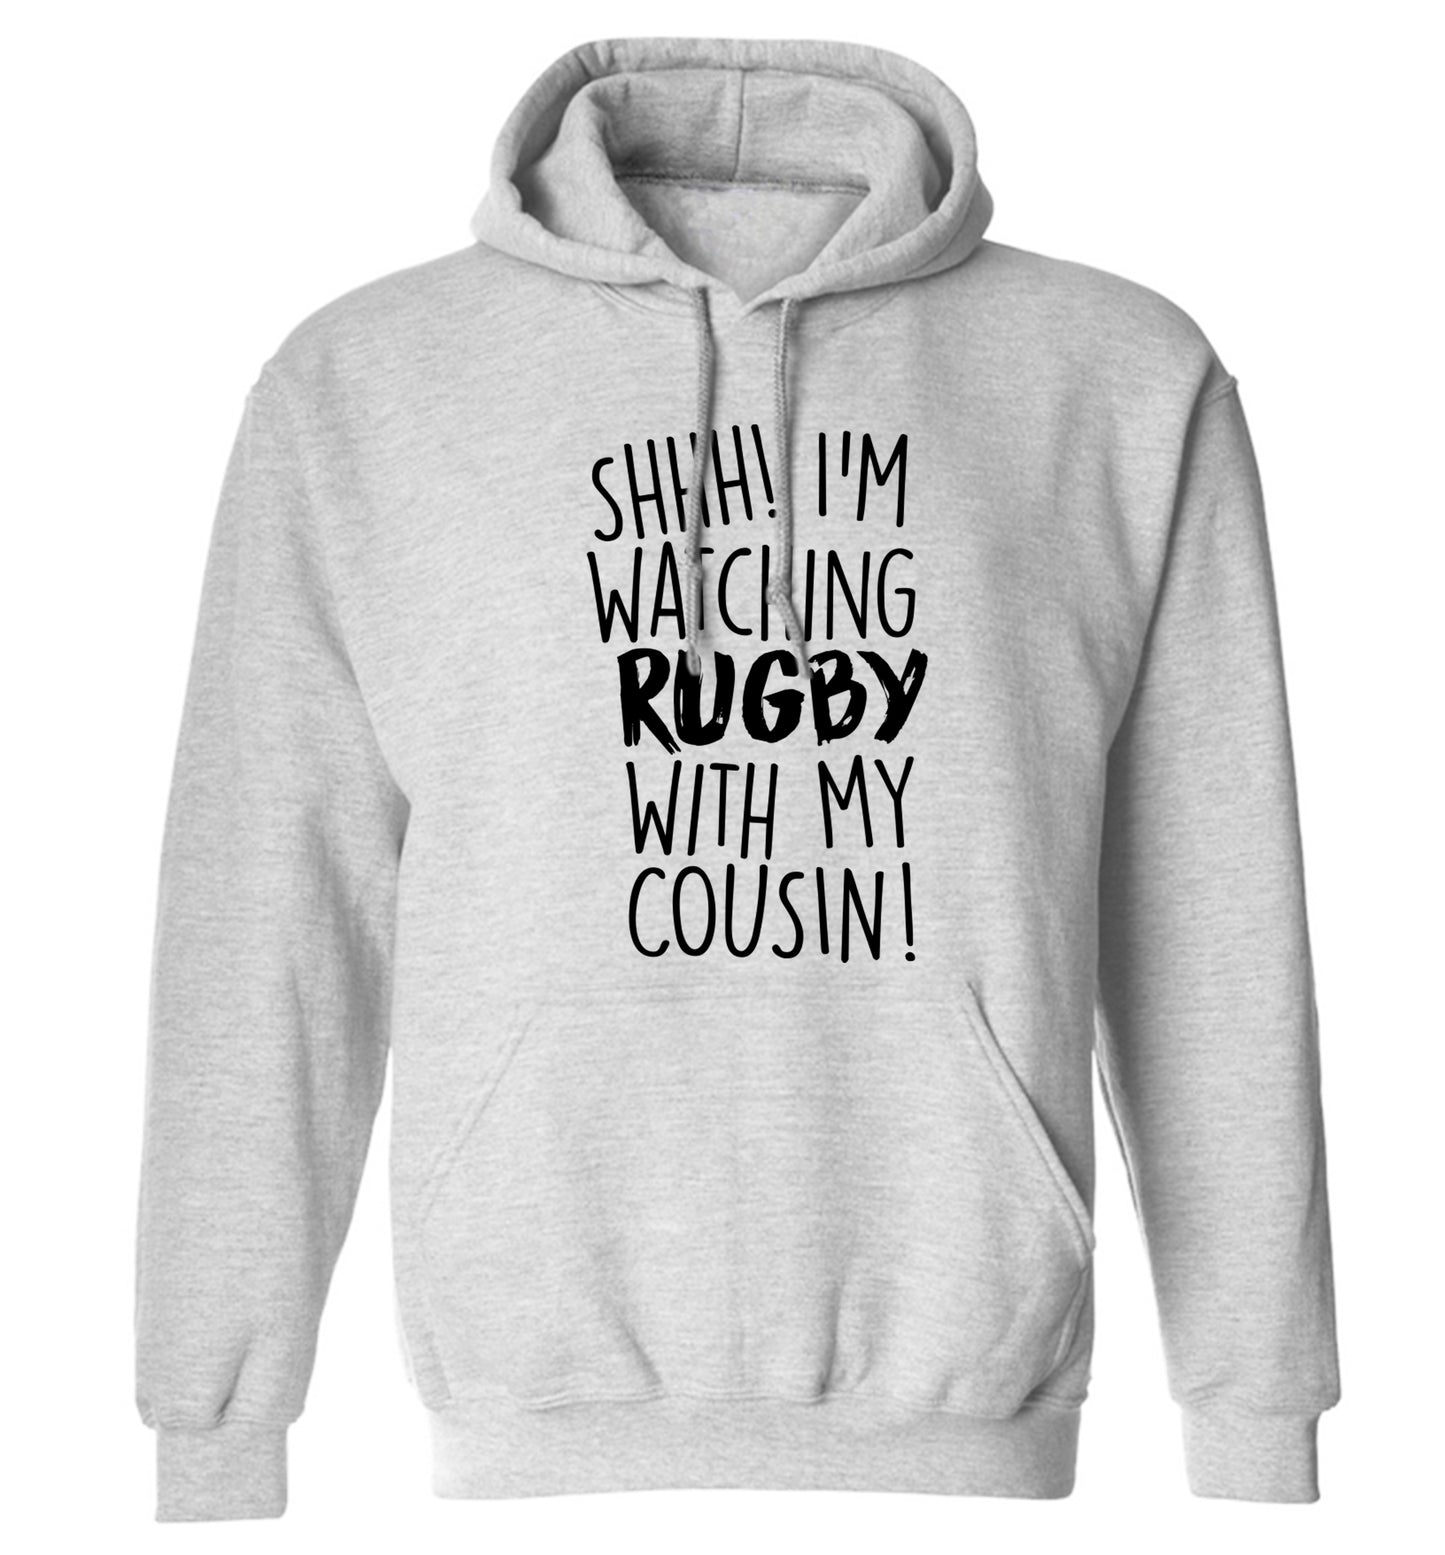 Shhh I'm watching rugby with my cousin adults unisex grey hoodie 2XL